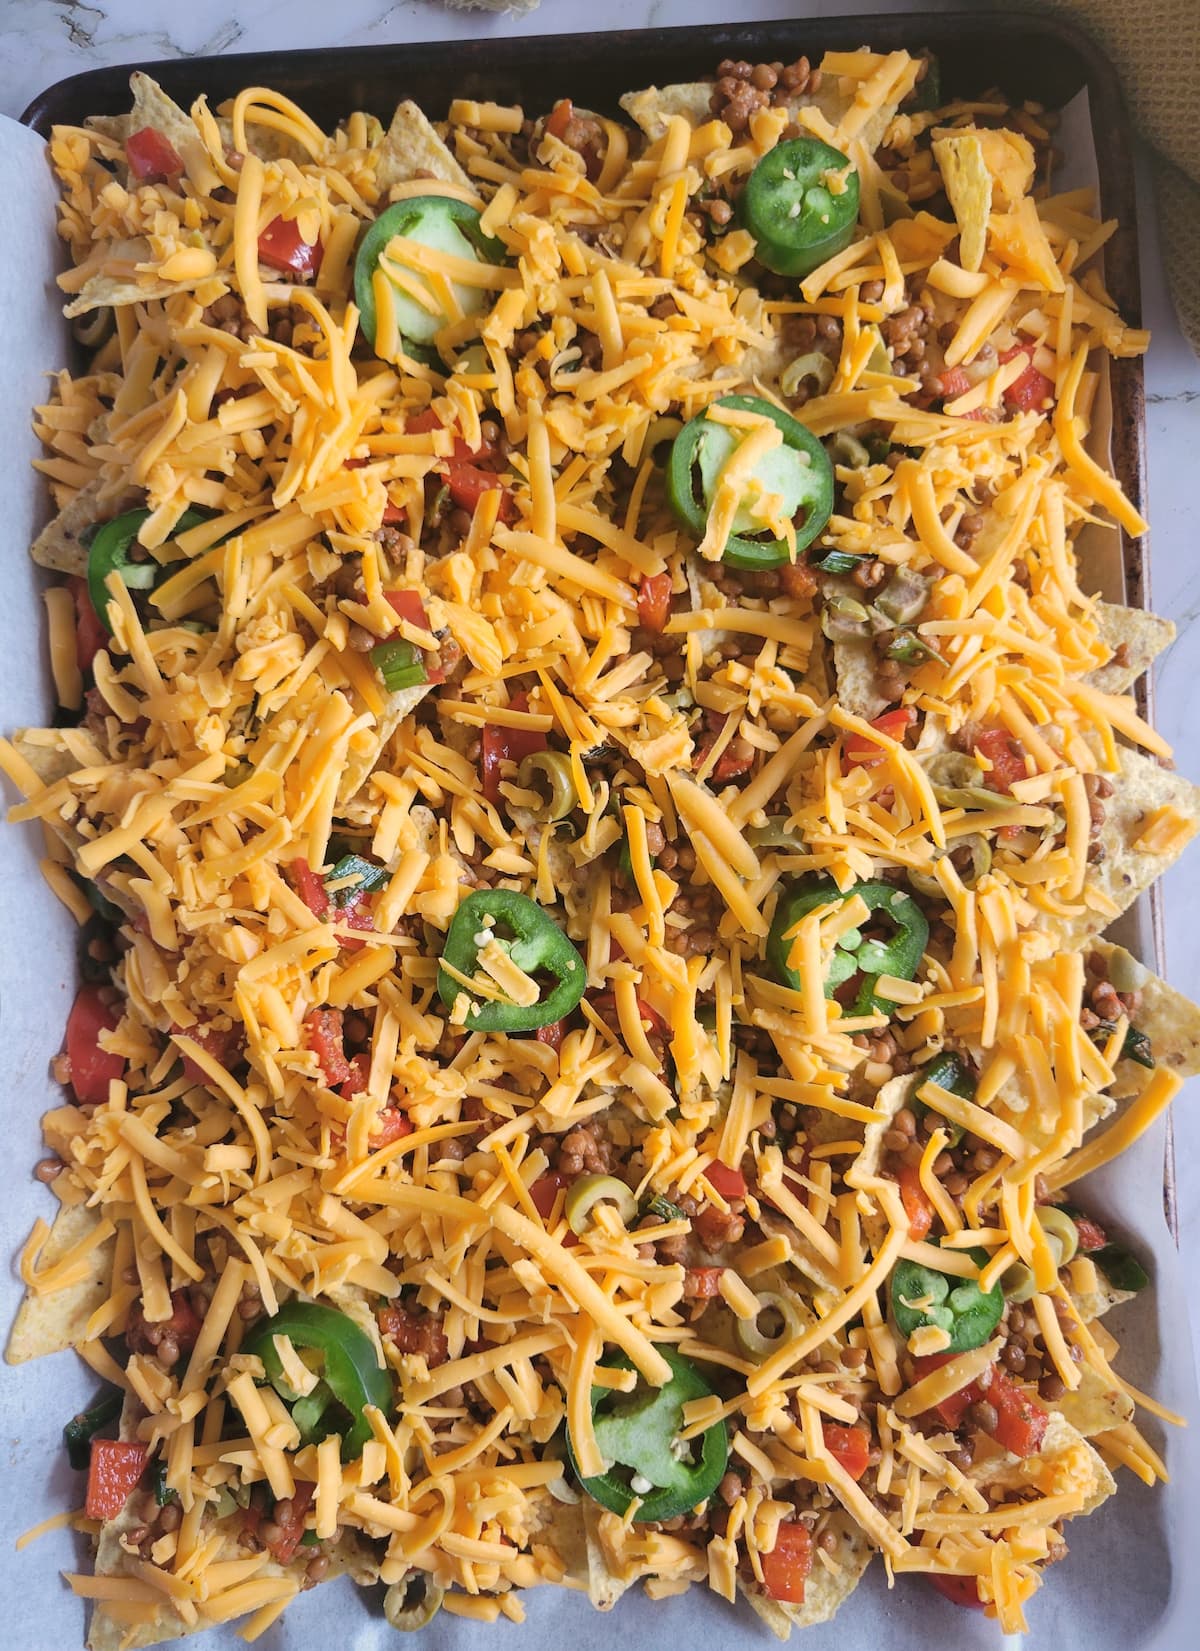 sheet pan of loaded nachos with sliced jalapenos and unmelted cheddar cheese